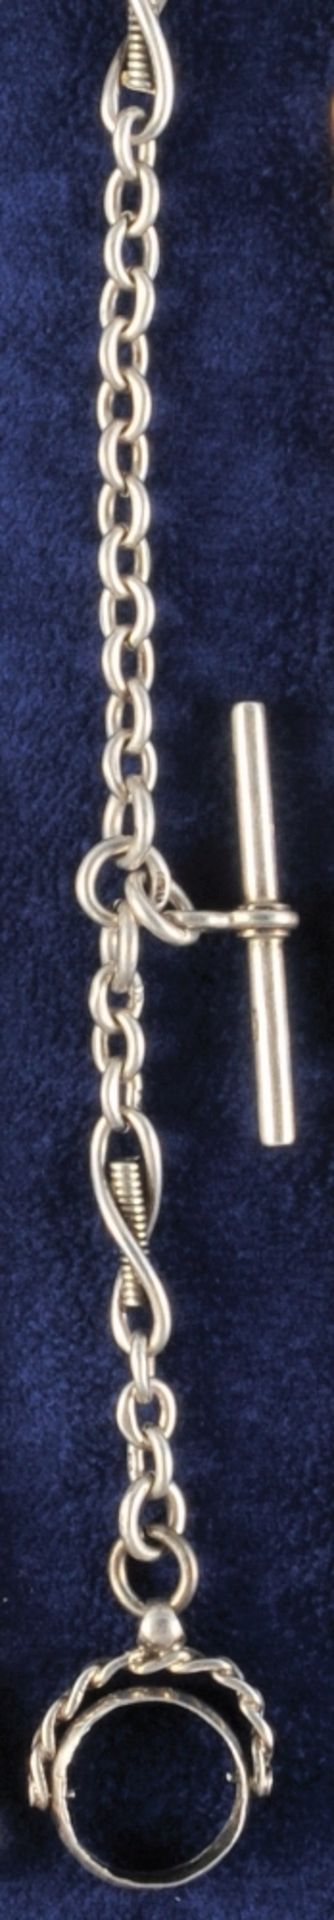 Silver pocket watch chain, chain links and fantasy links,